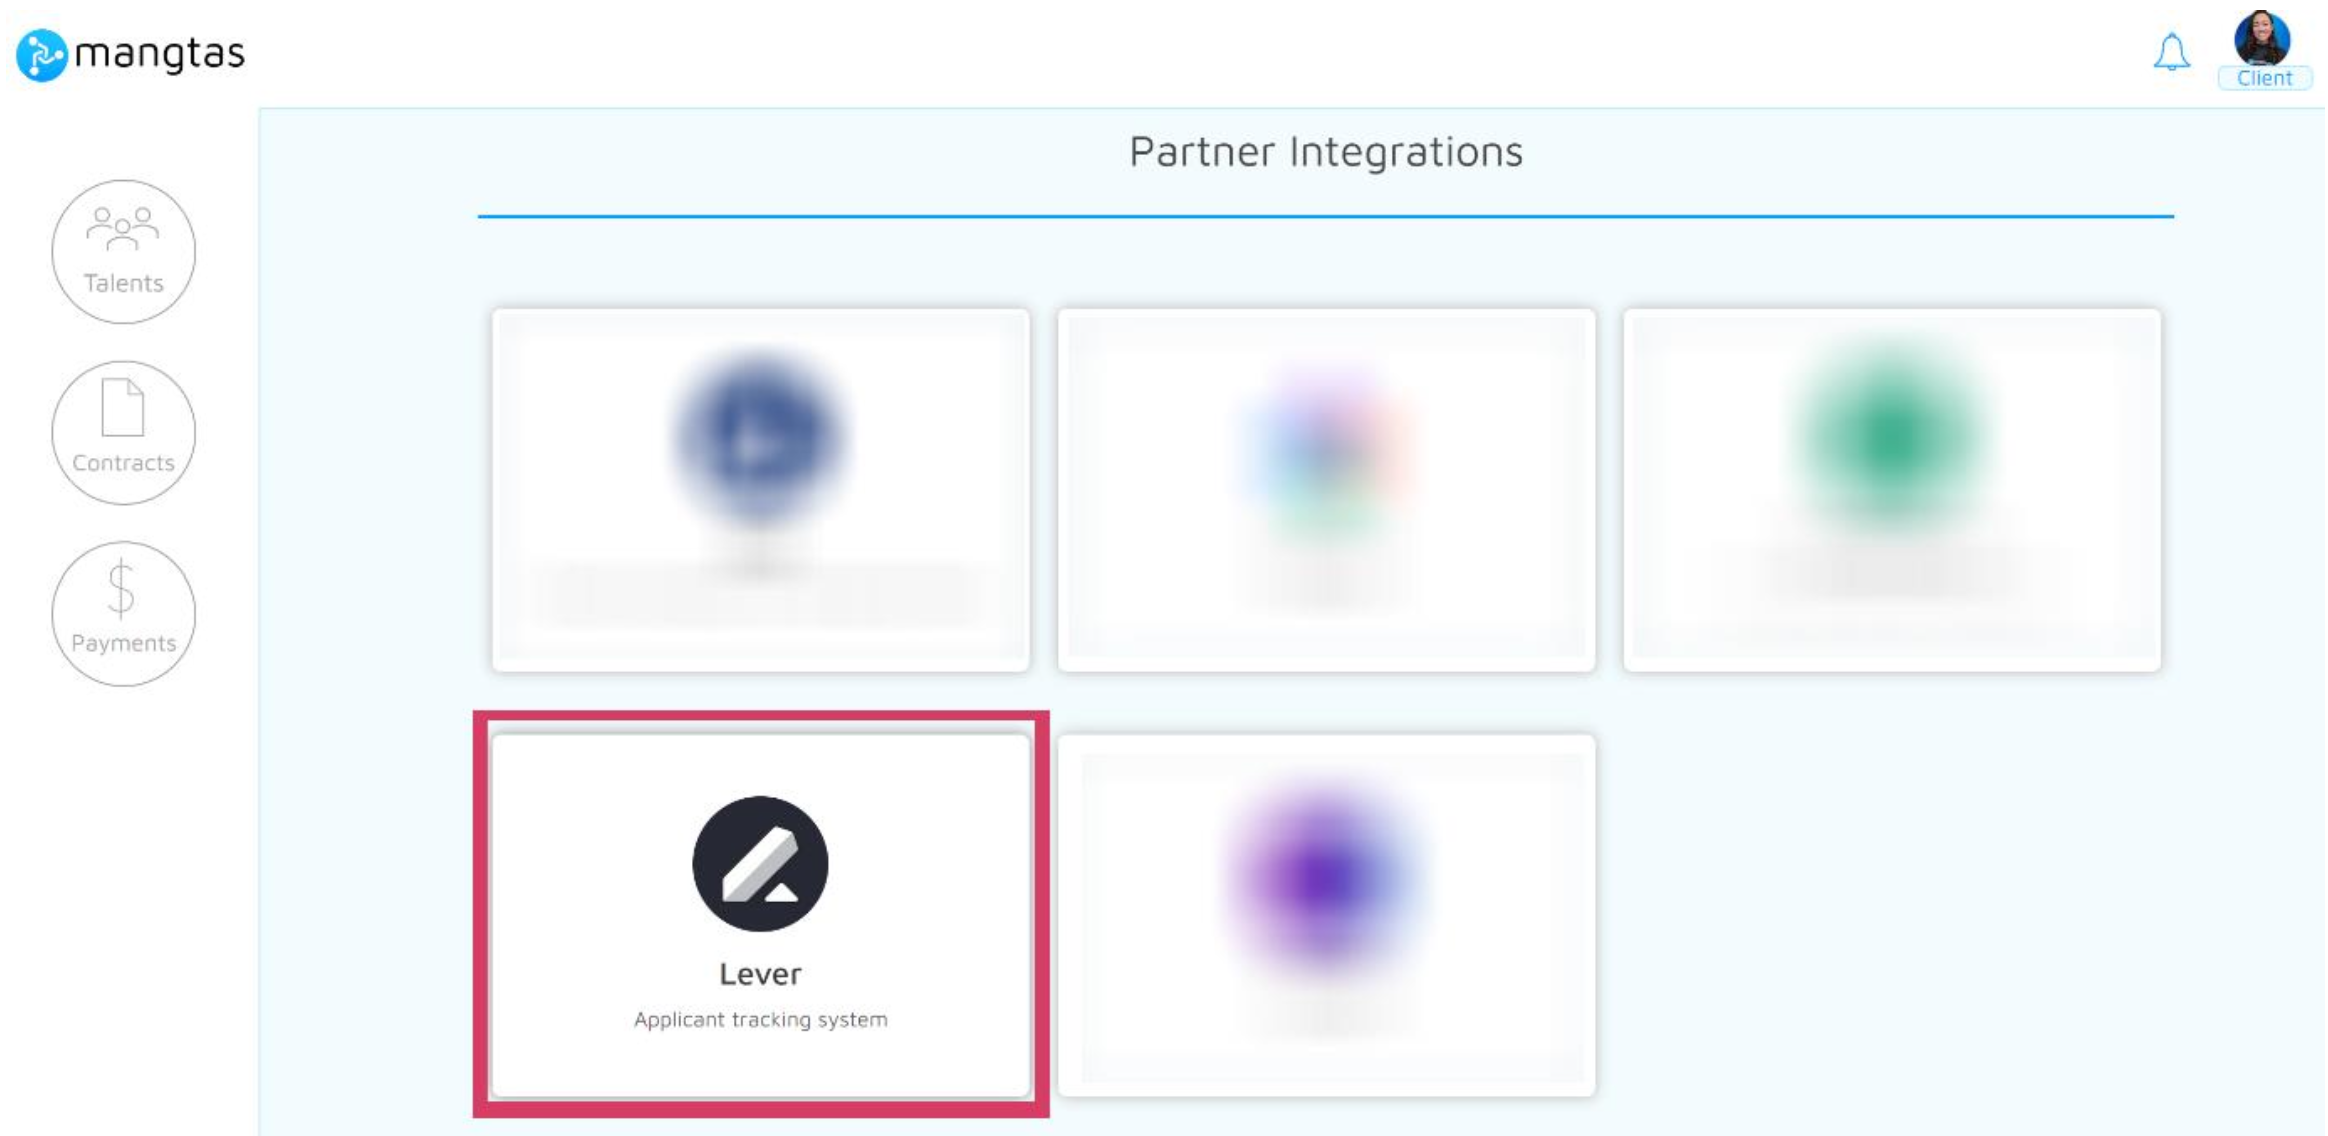 Lever listing outlined on Partner Integrations page in Mangtas